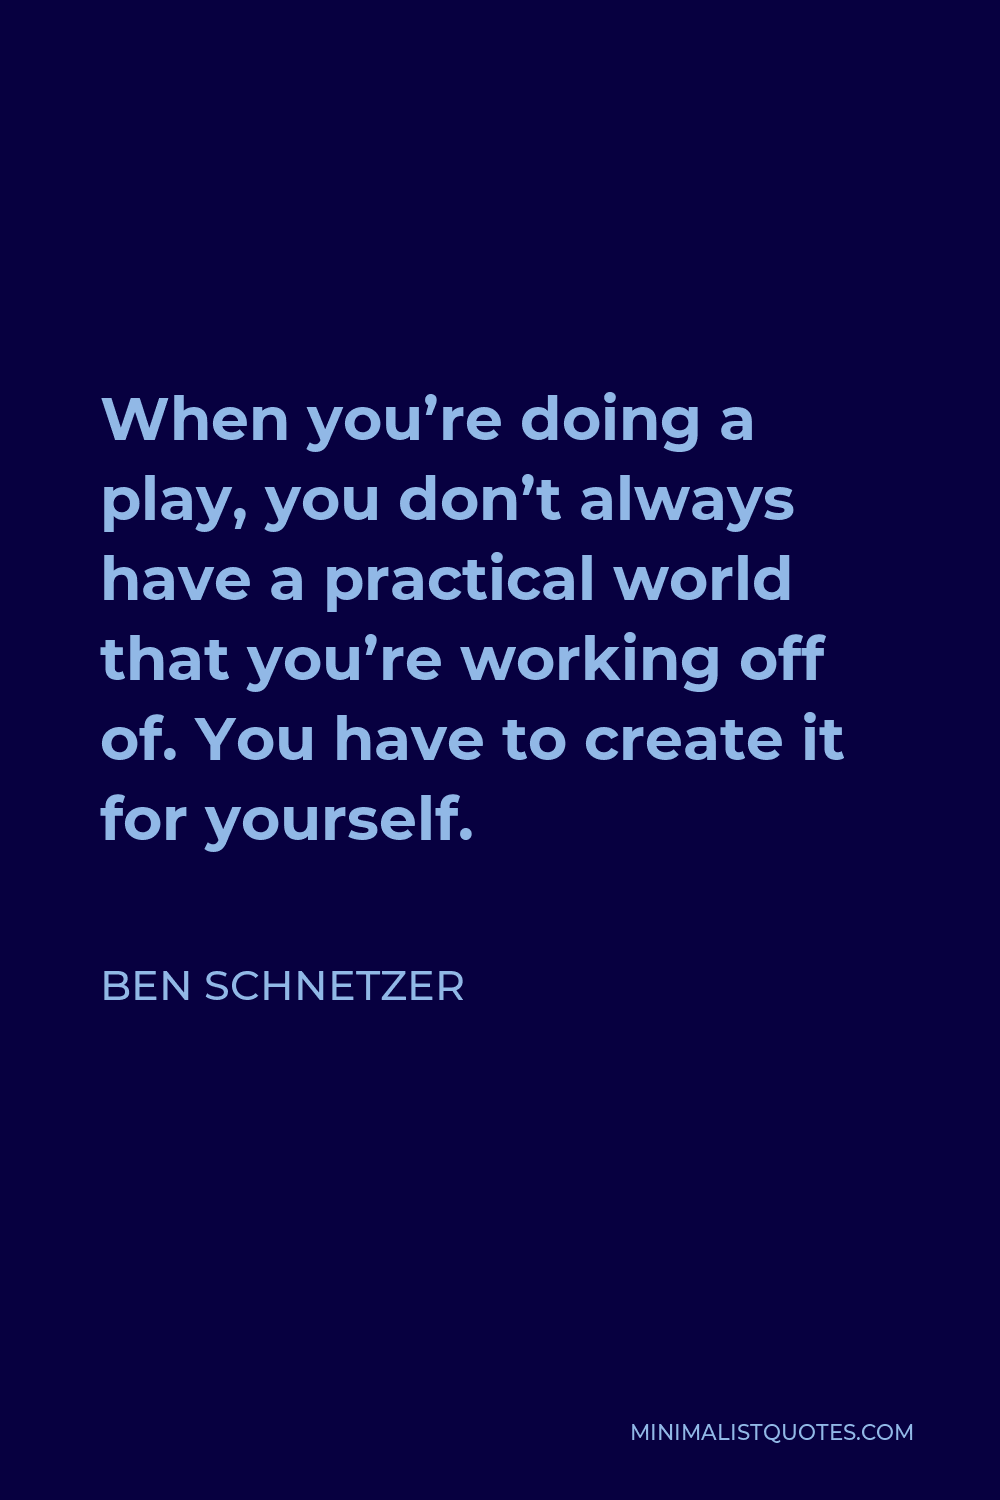 Ben Schnetzer Quote - When you’re doing a play, you don’t always have a practical world that you’re working off of. You have to create it for yourself.